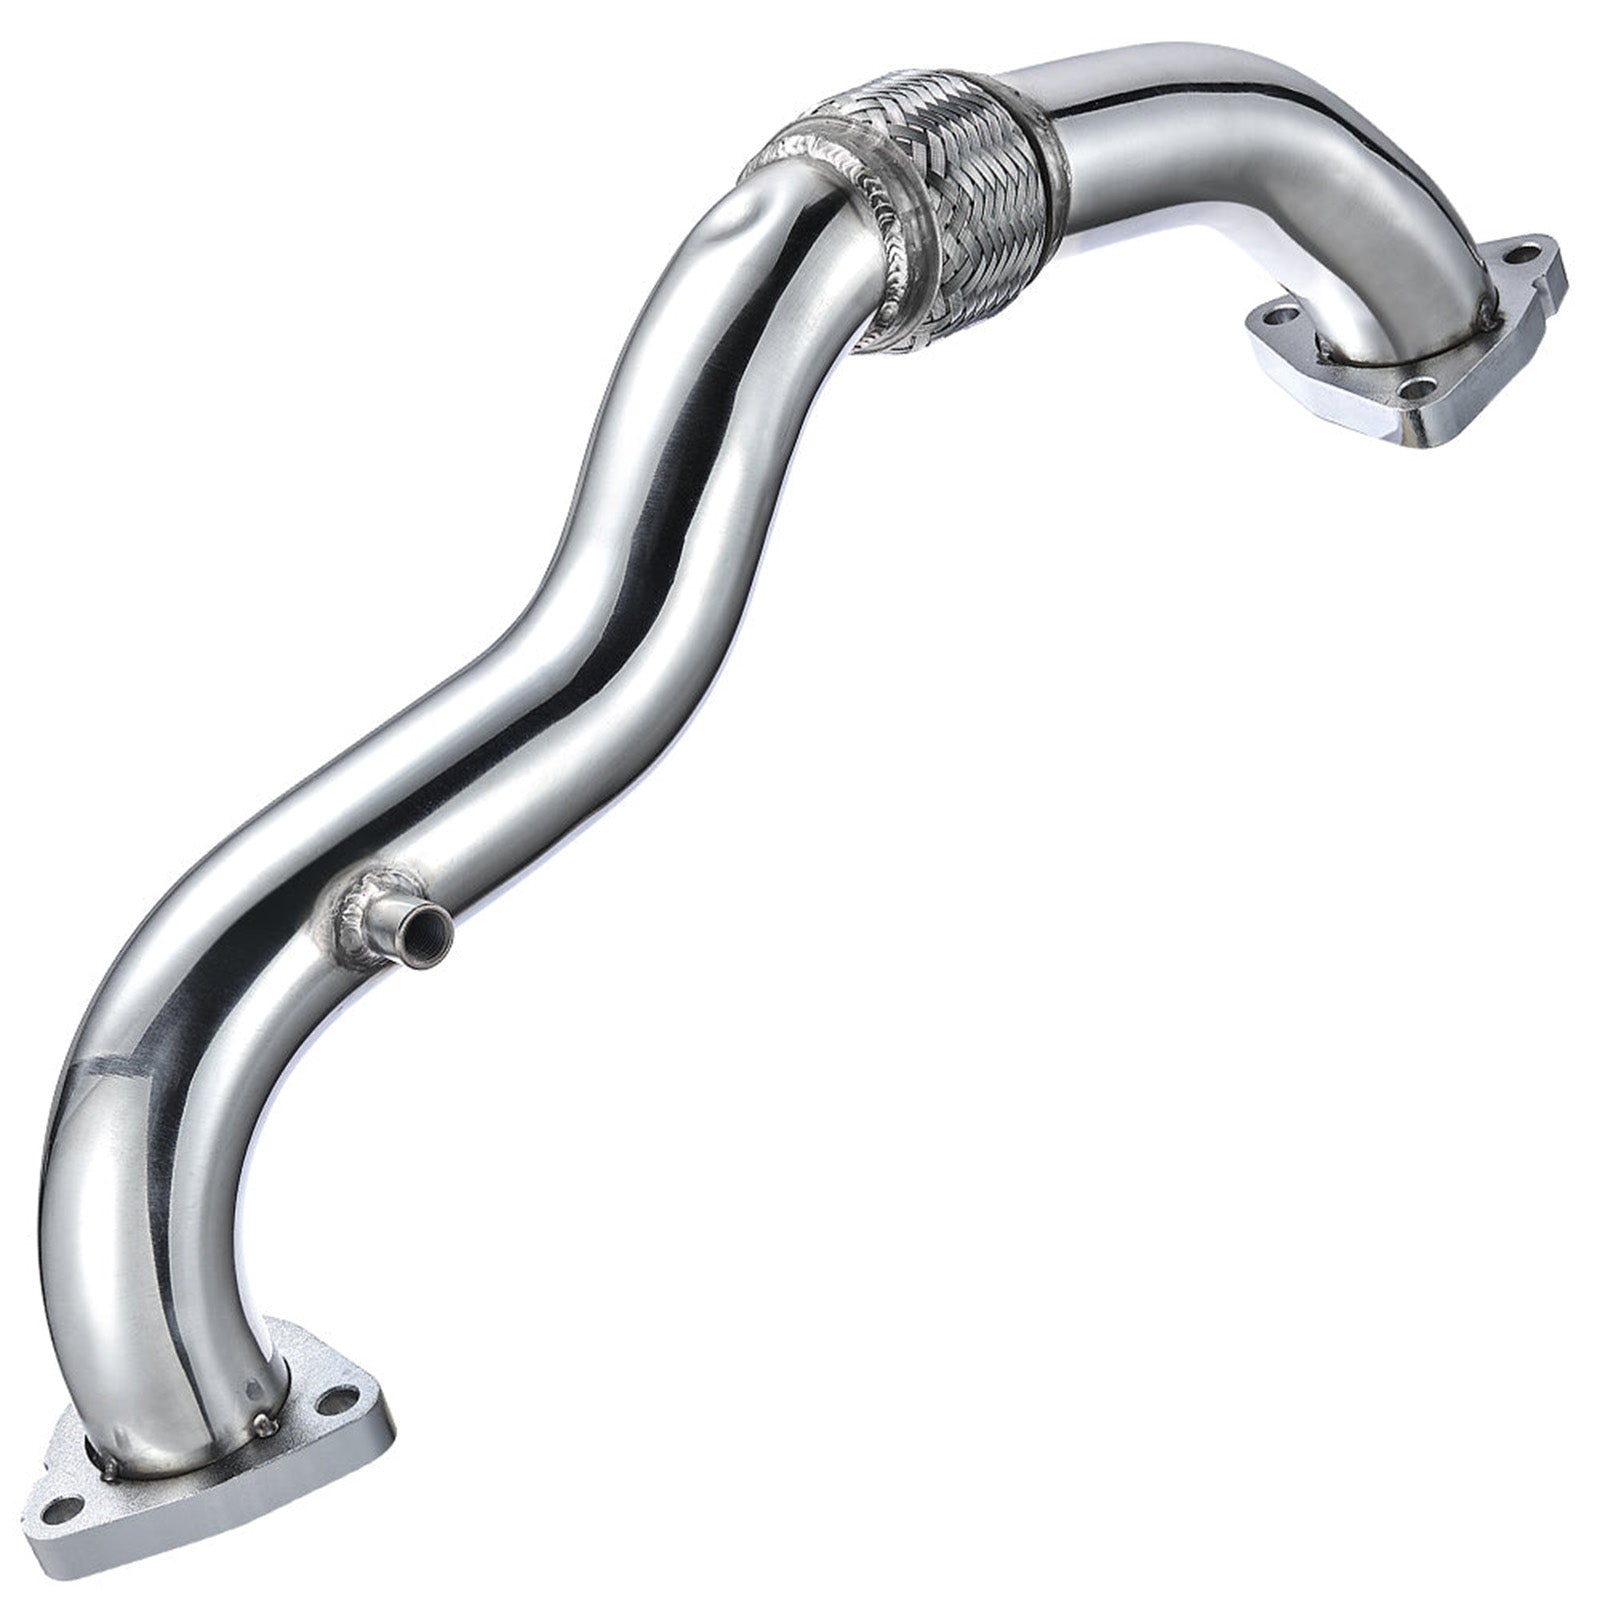 Ford 2008-2010 6.4L Powerstroke Diesel Heavy Duty Polished No EGR Exhaust Up-Pipe